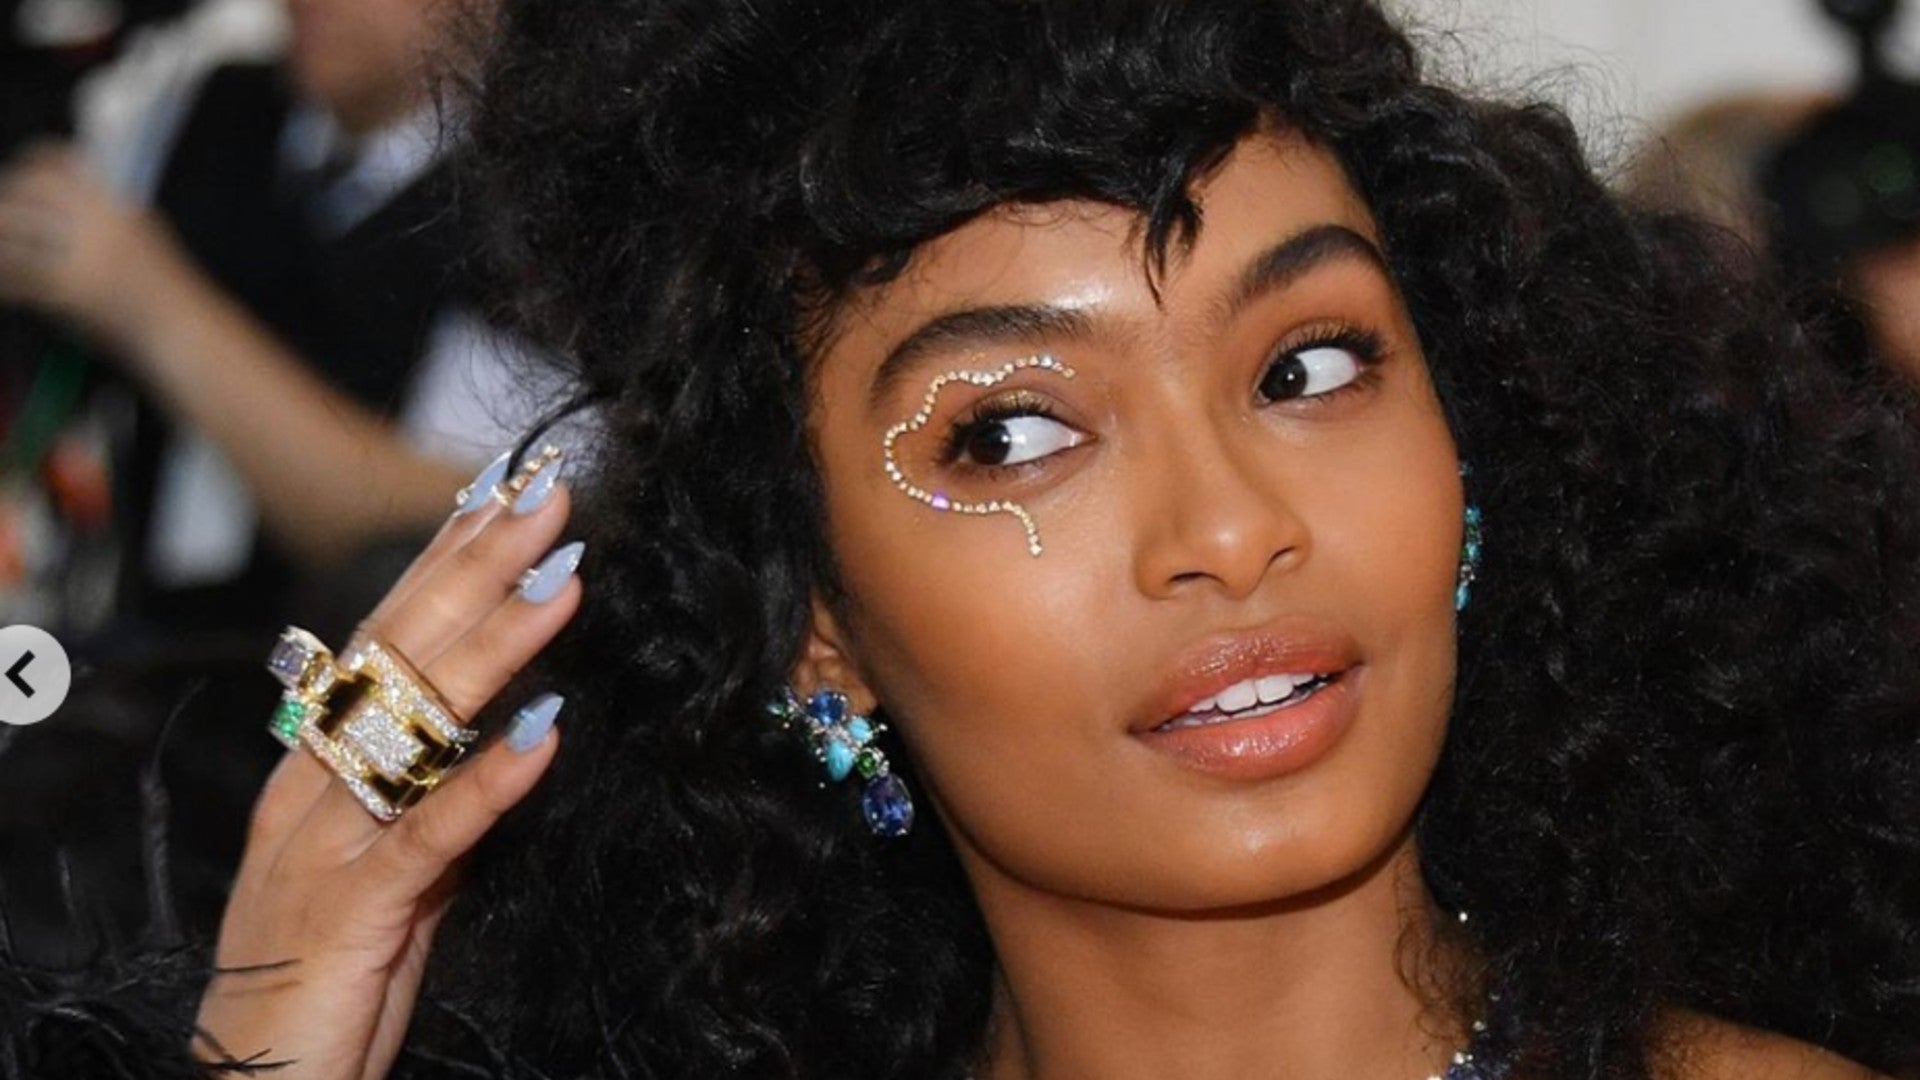 Yara Shahidi’s Inspiring Get Ready With Me Tutorial Reminds Us To Have Fun With Makeup